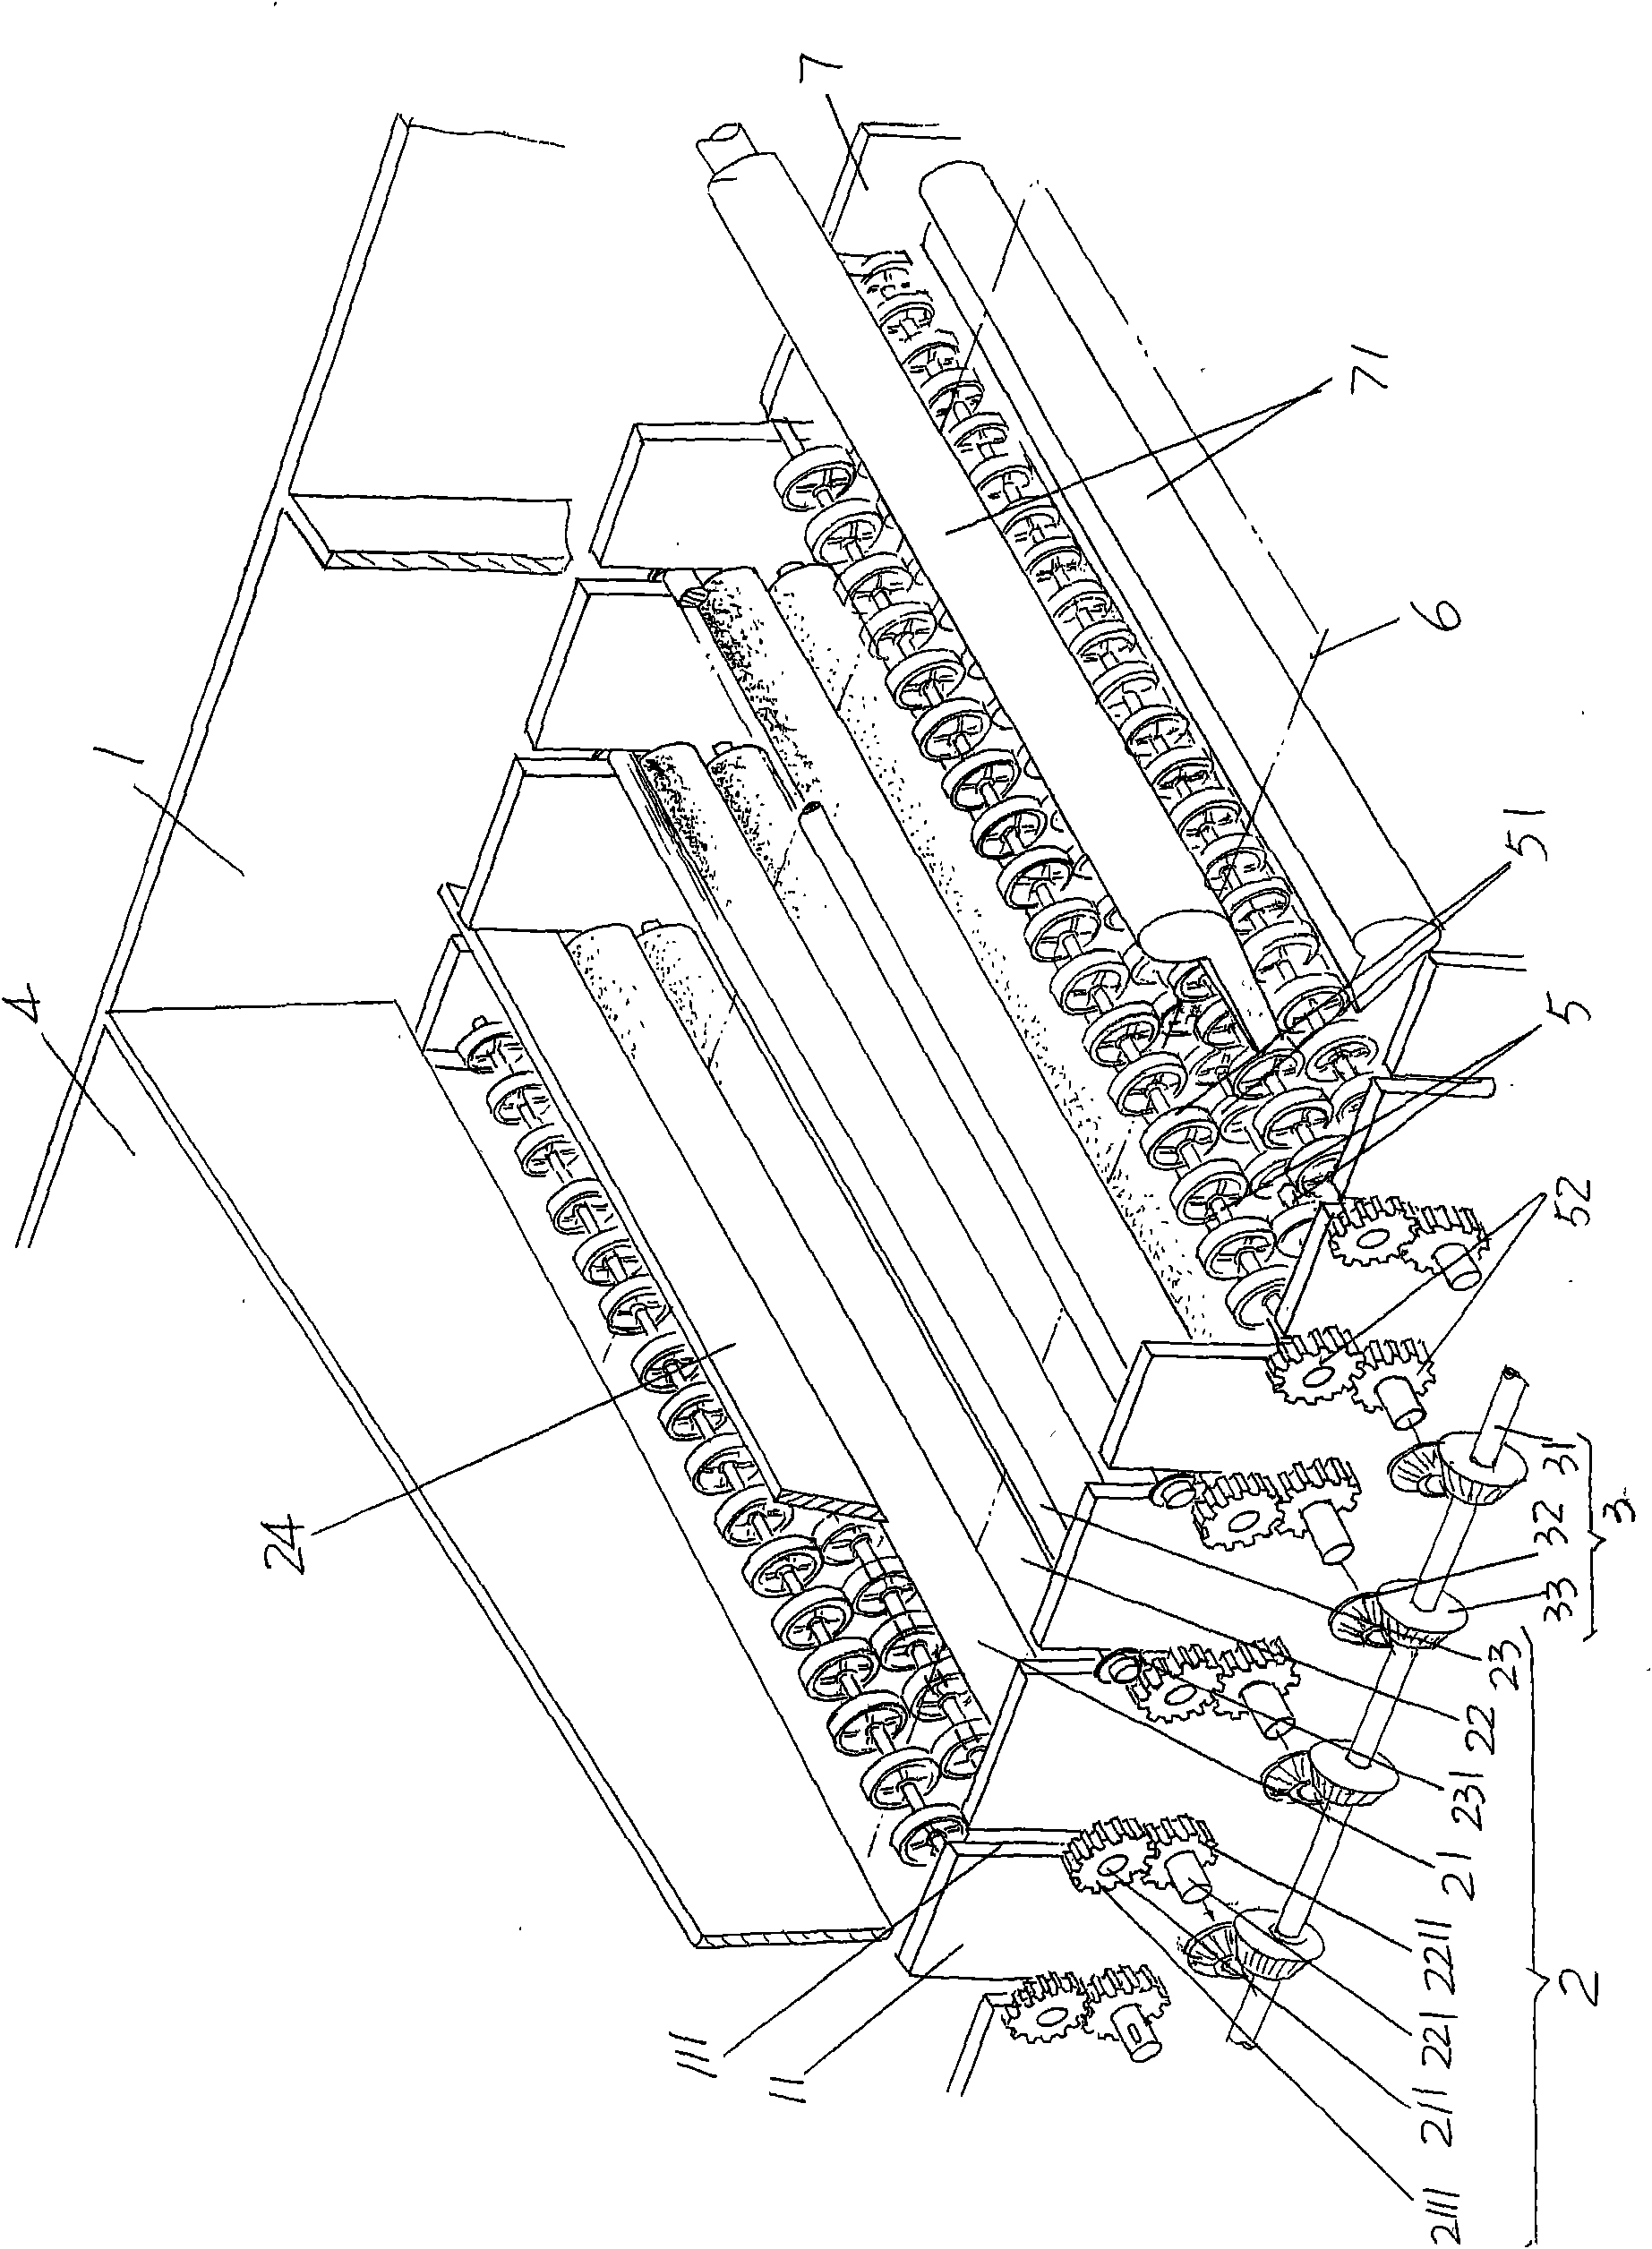 Dewatering device for flexible circuit board